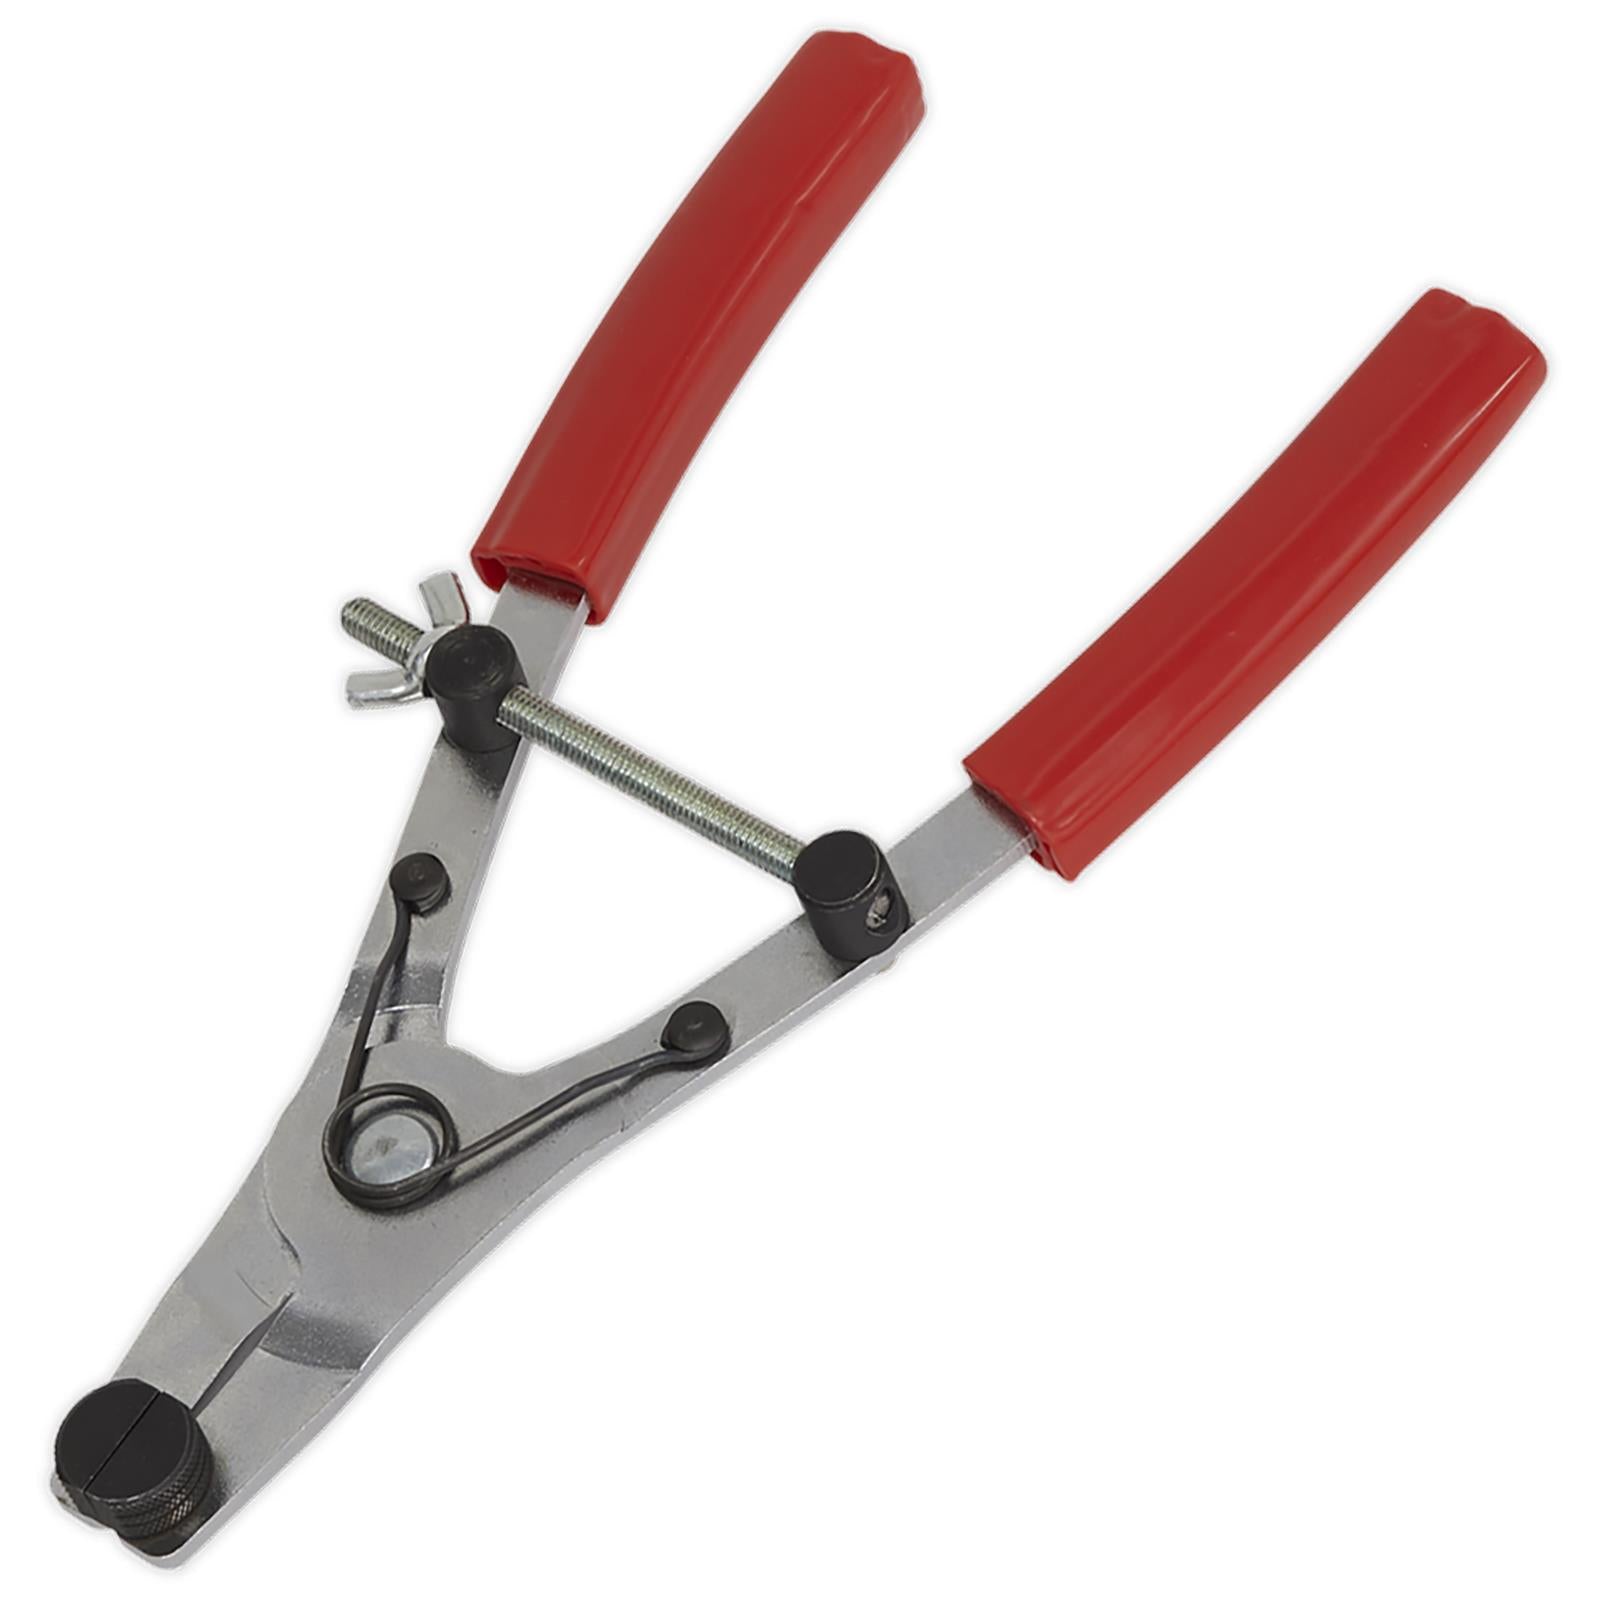 Sealey Motorcycle Brake Piston Removal Pliers 18mm-43.5mm Capacity